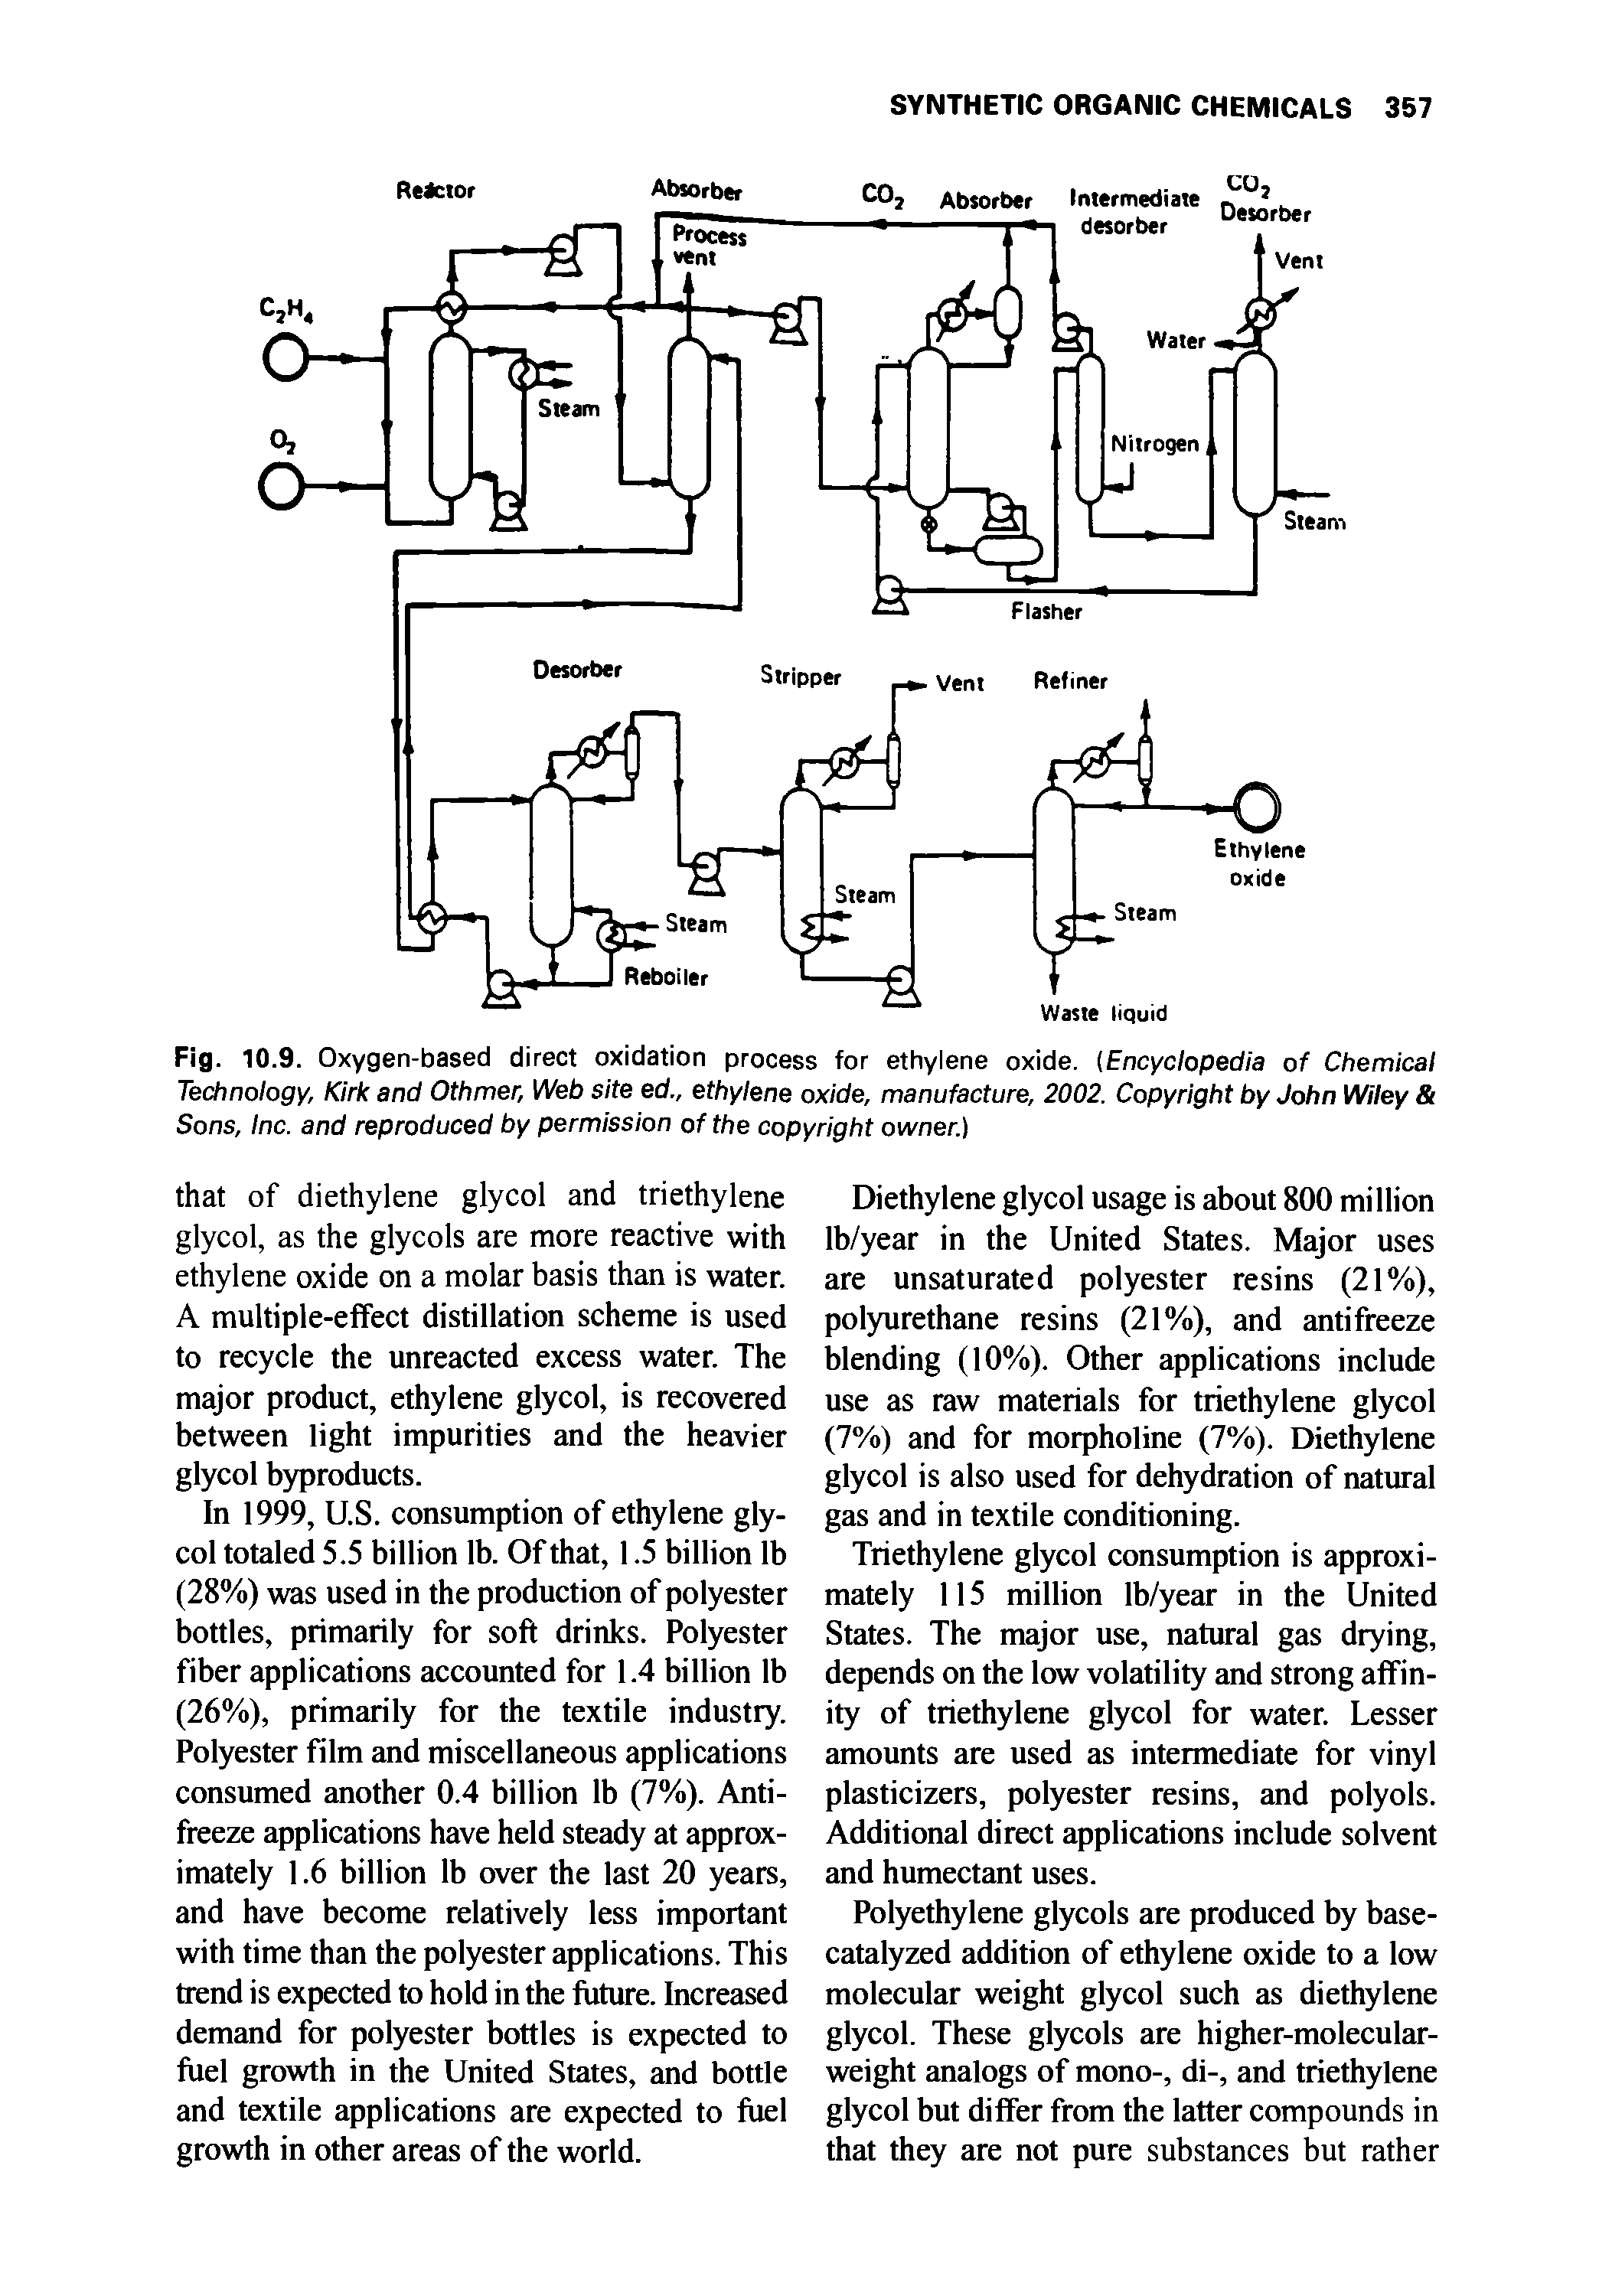 Fig. 10.9. Oxygen-based direct oxidation process for ethylene oxide. (Encyclopedia of Chemical Technology, Kirk and Othmer, Web site ed., ethylene oxide, manufacture, 2002. Copyright by John Wiley Sons, Inc. and reproduced by permission of the copyright owner.)...